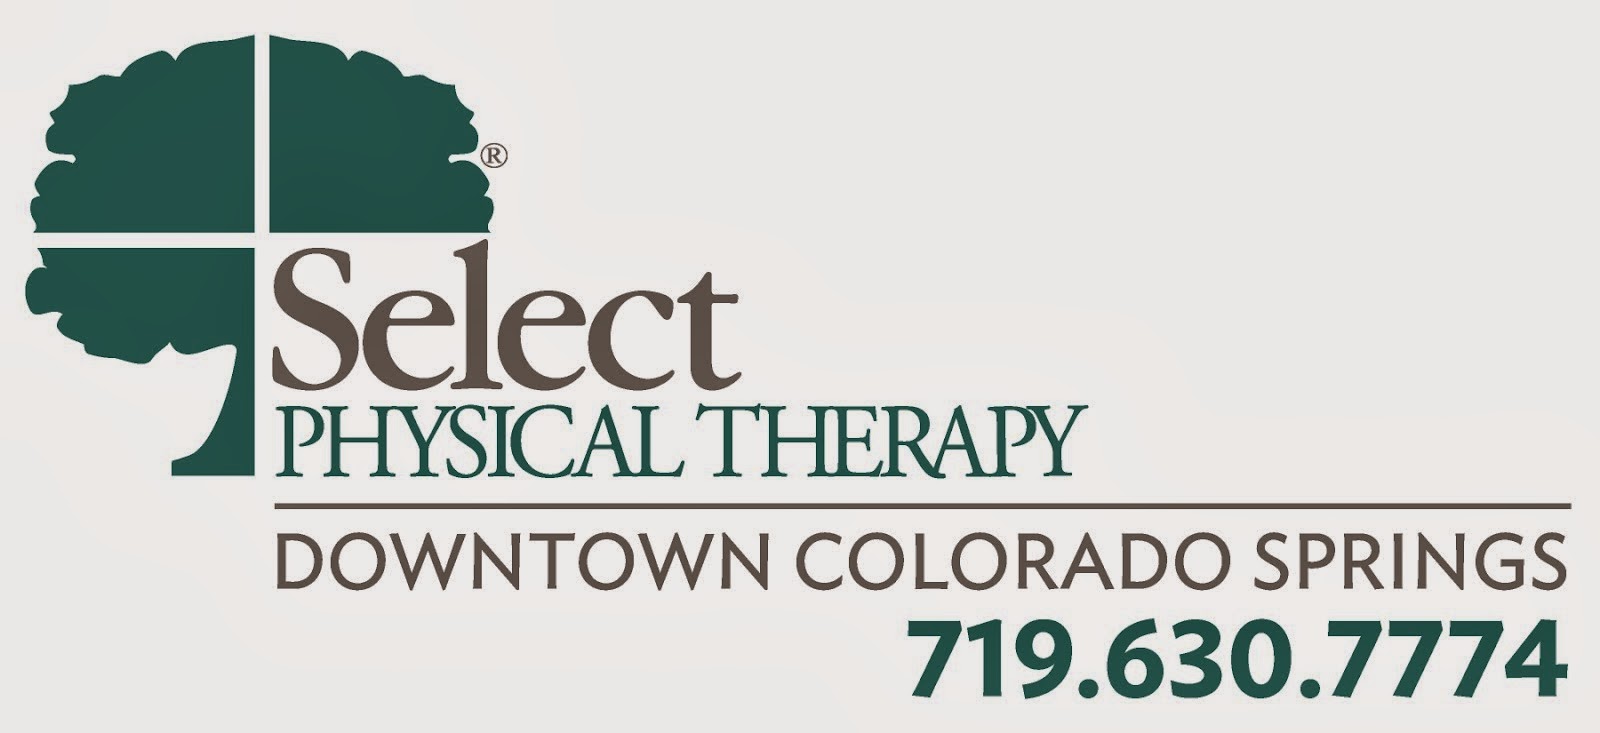 Select PT is located at 15 S Weber St in Downtown Colorado Springs